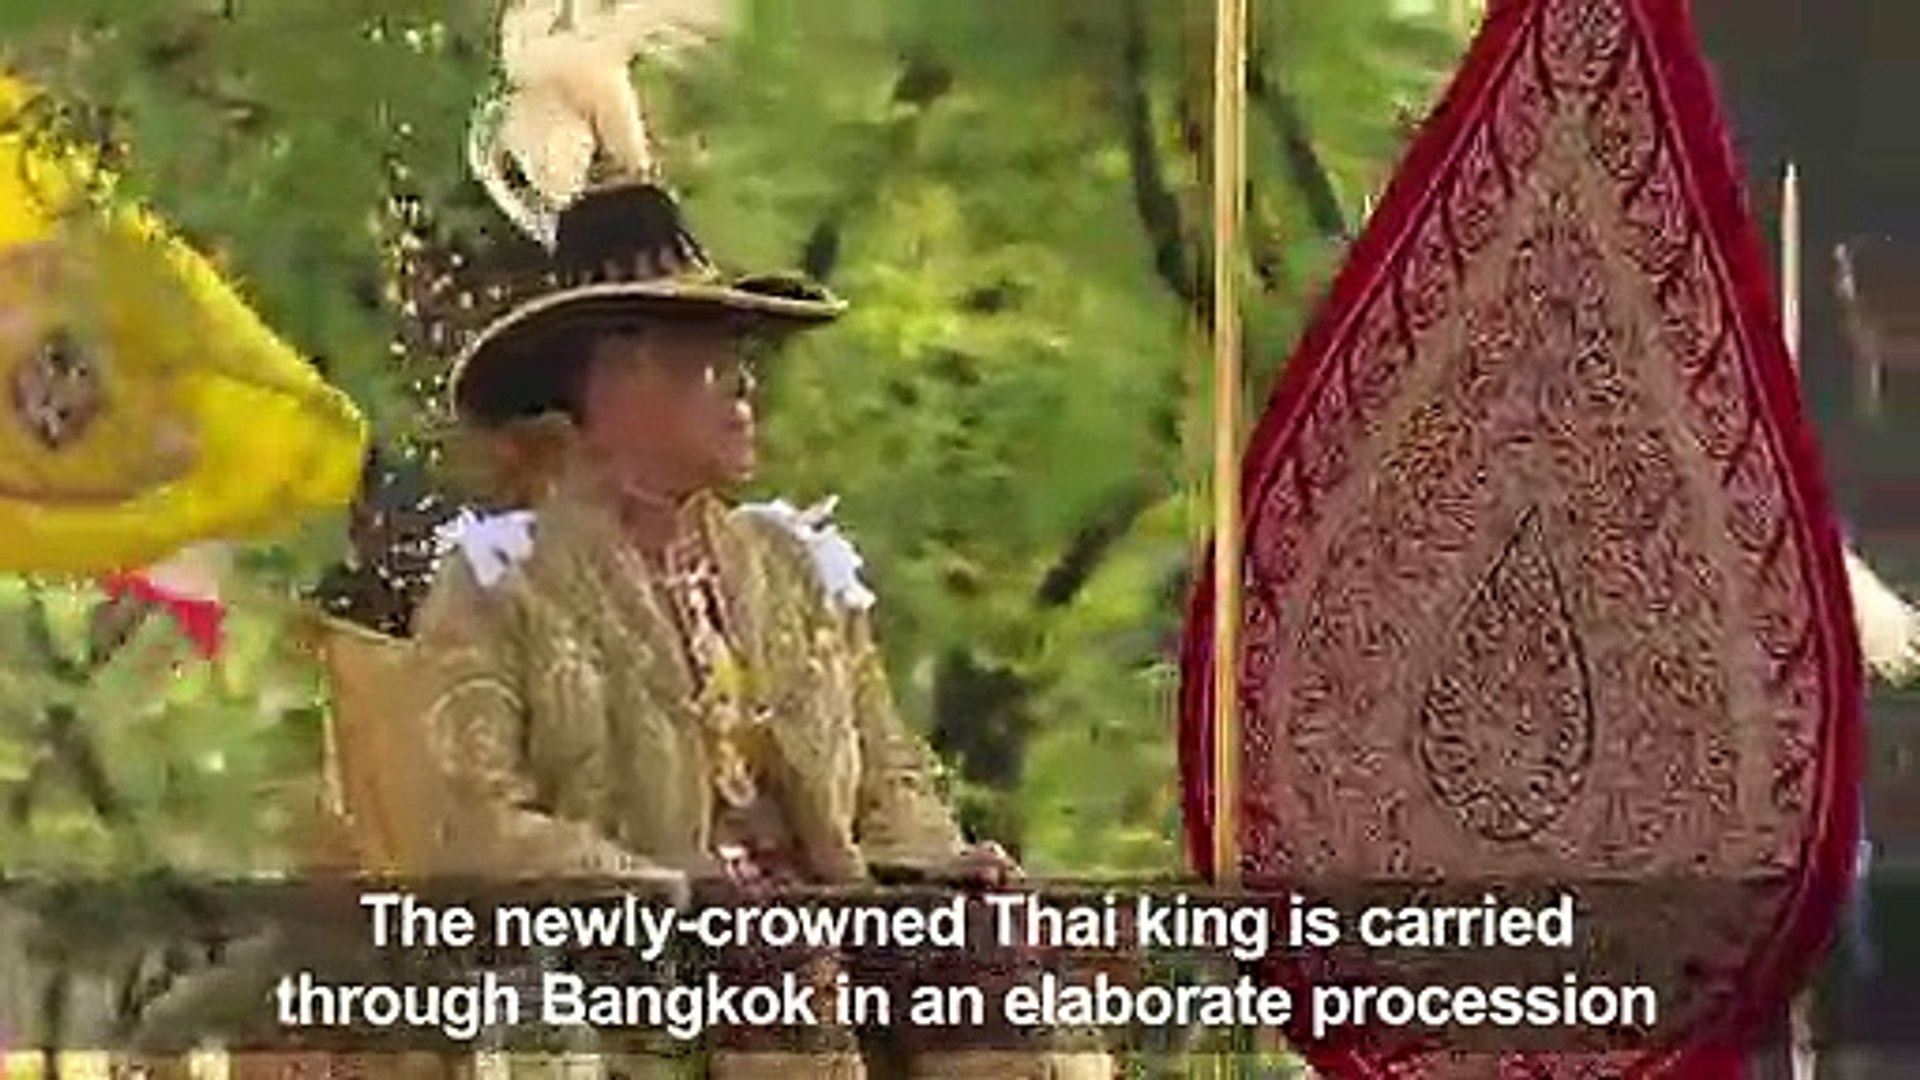 Newly-crowned Thai king carried in elaborate royal procession - Vidéo  Dailymotion